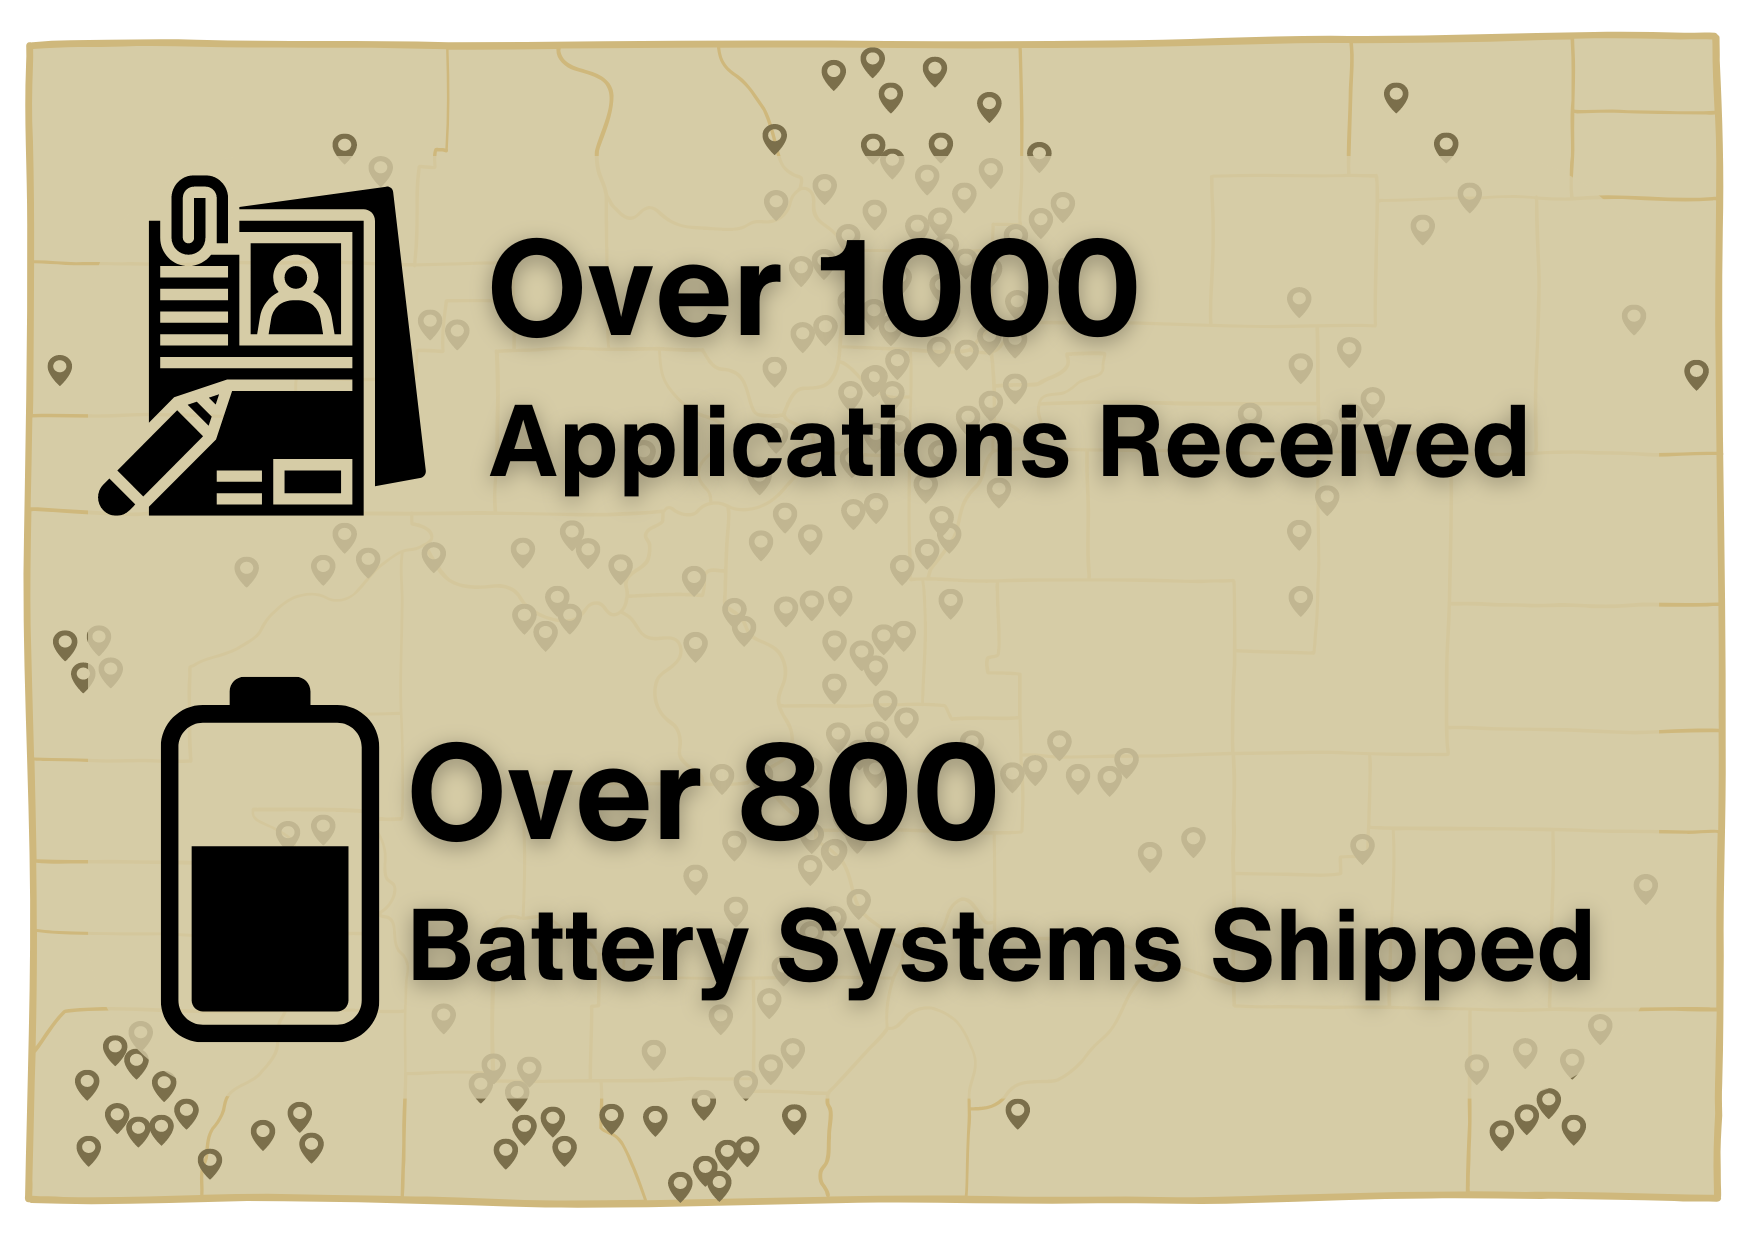 Map of Colorado - Over 1000 Applications Received. Over 800 Battery Systems Shipped